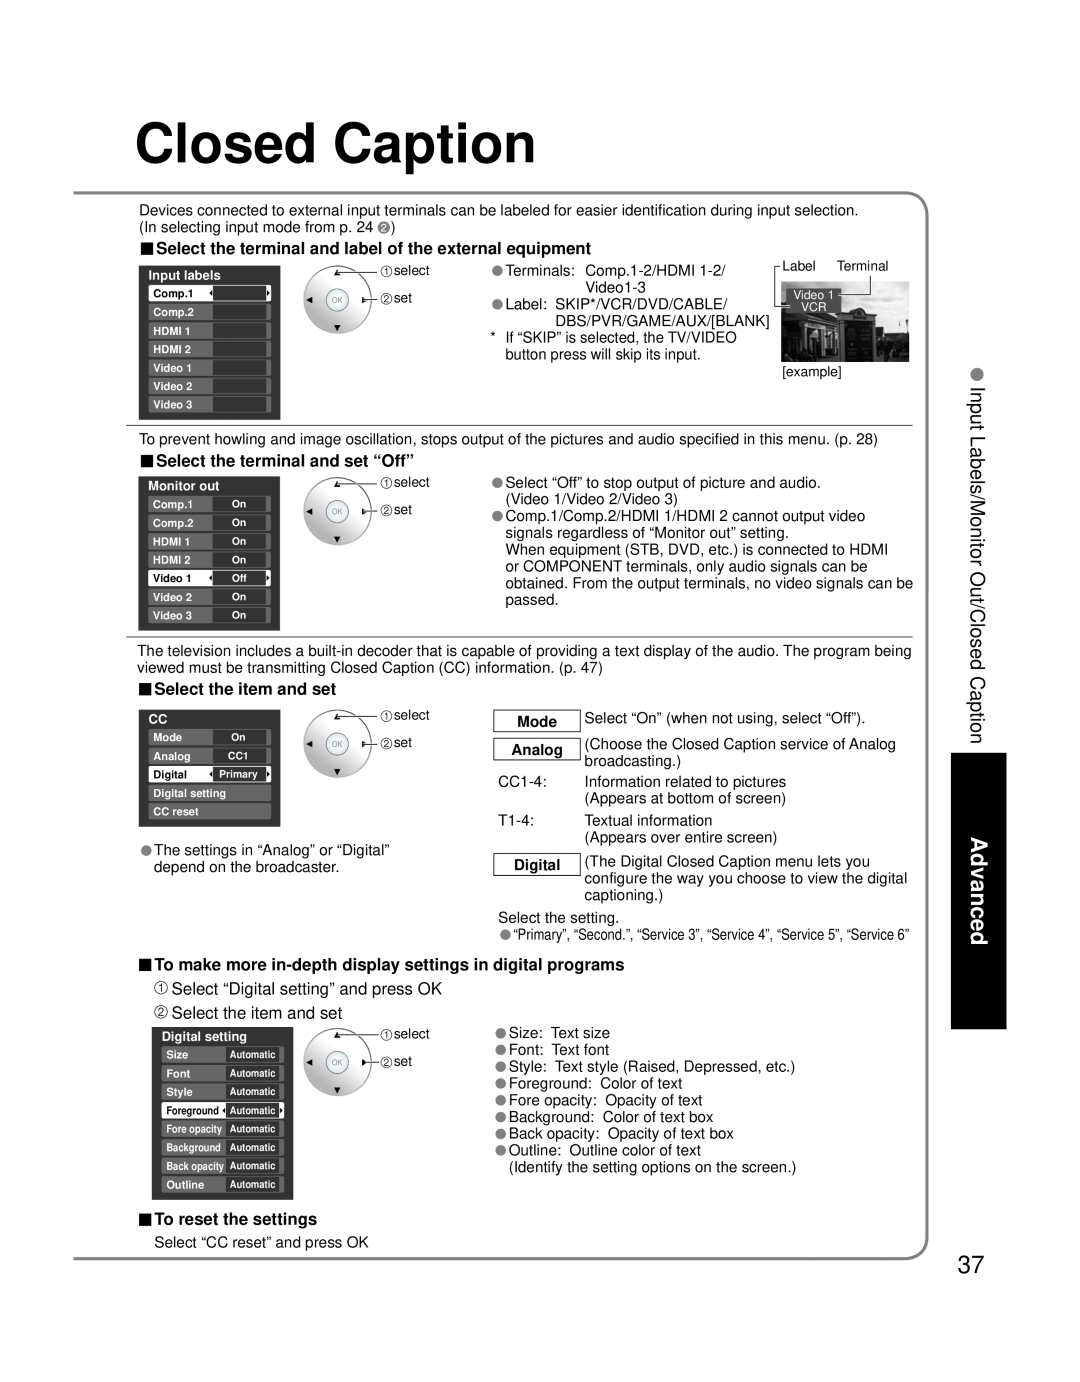 Panasonic TQB2AA0756 Closed Caption, Input Labels/Monitor Out/Closed, Select the item and set, To reset the settings 